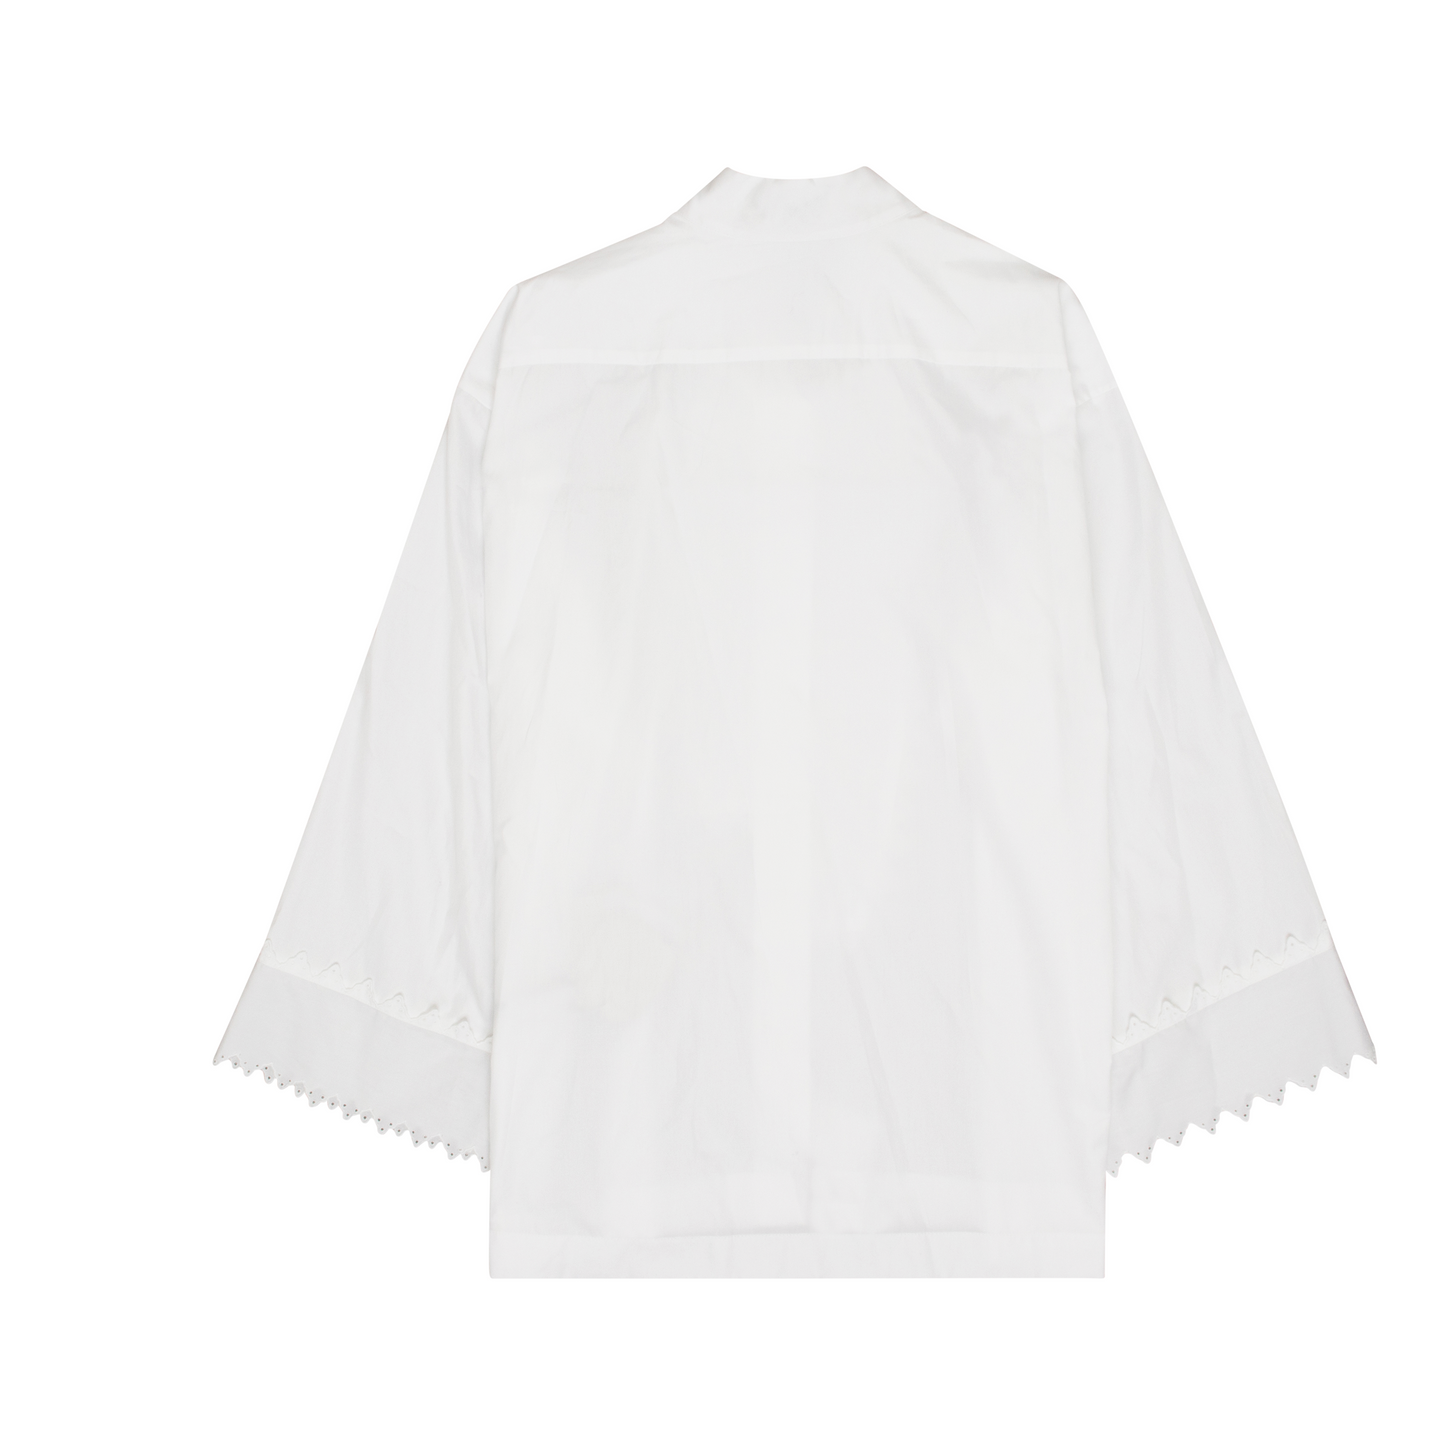 Lace Trim Asymetric Oversize Shirt in White